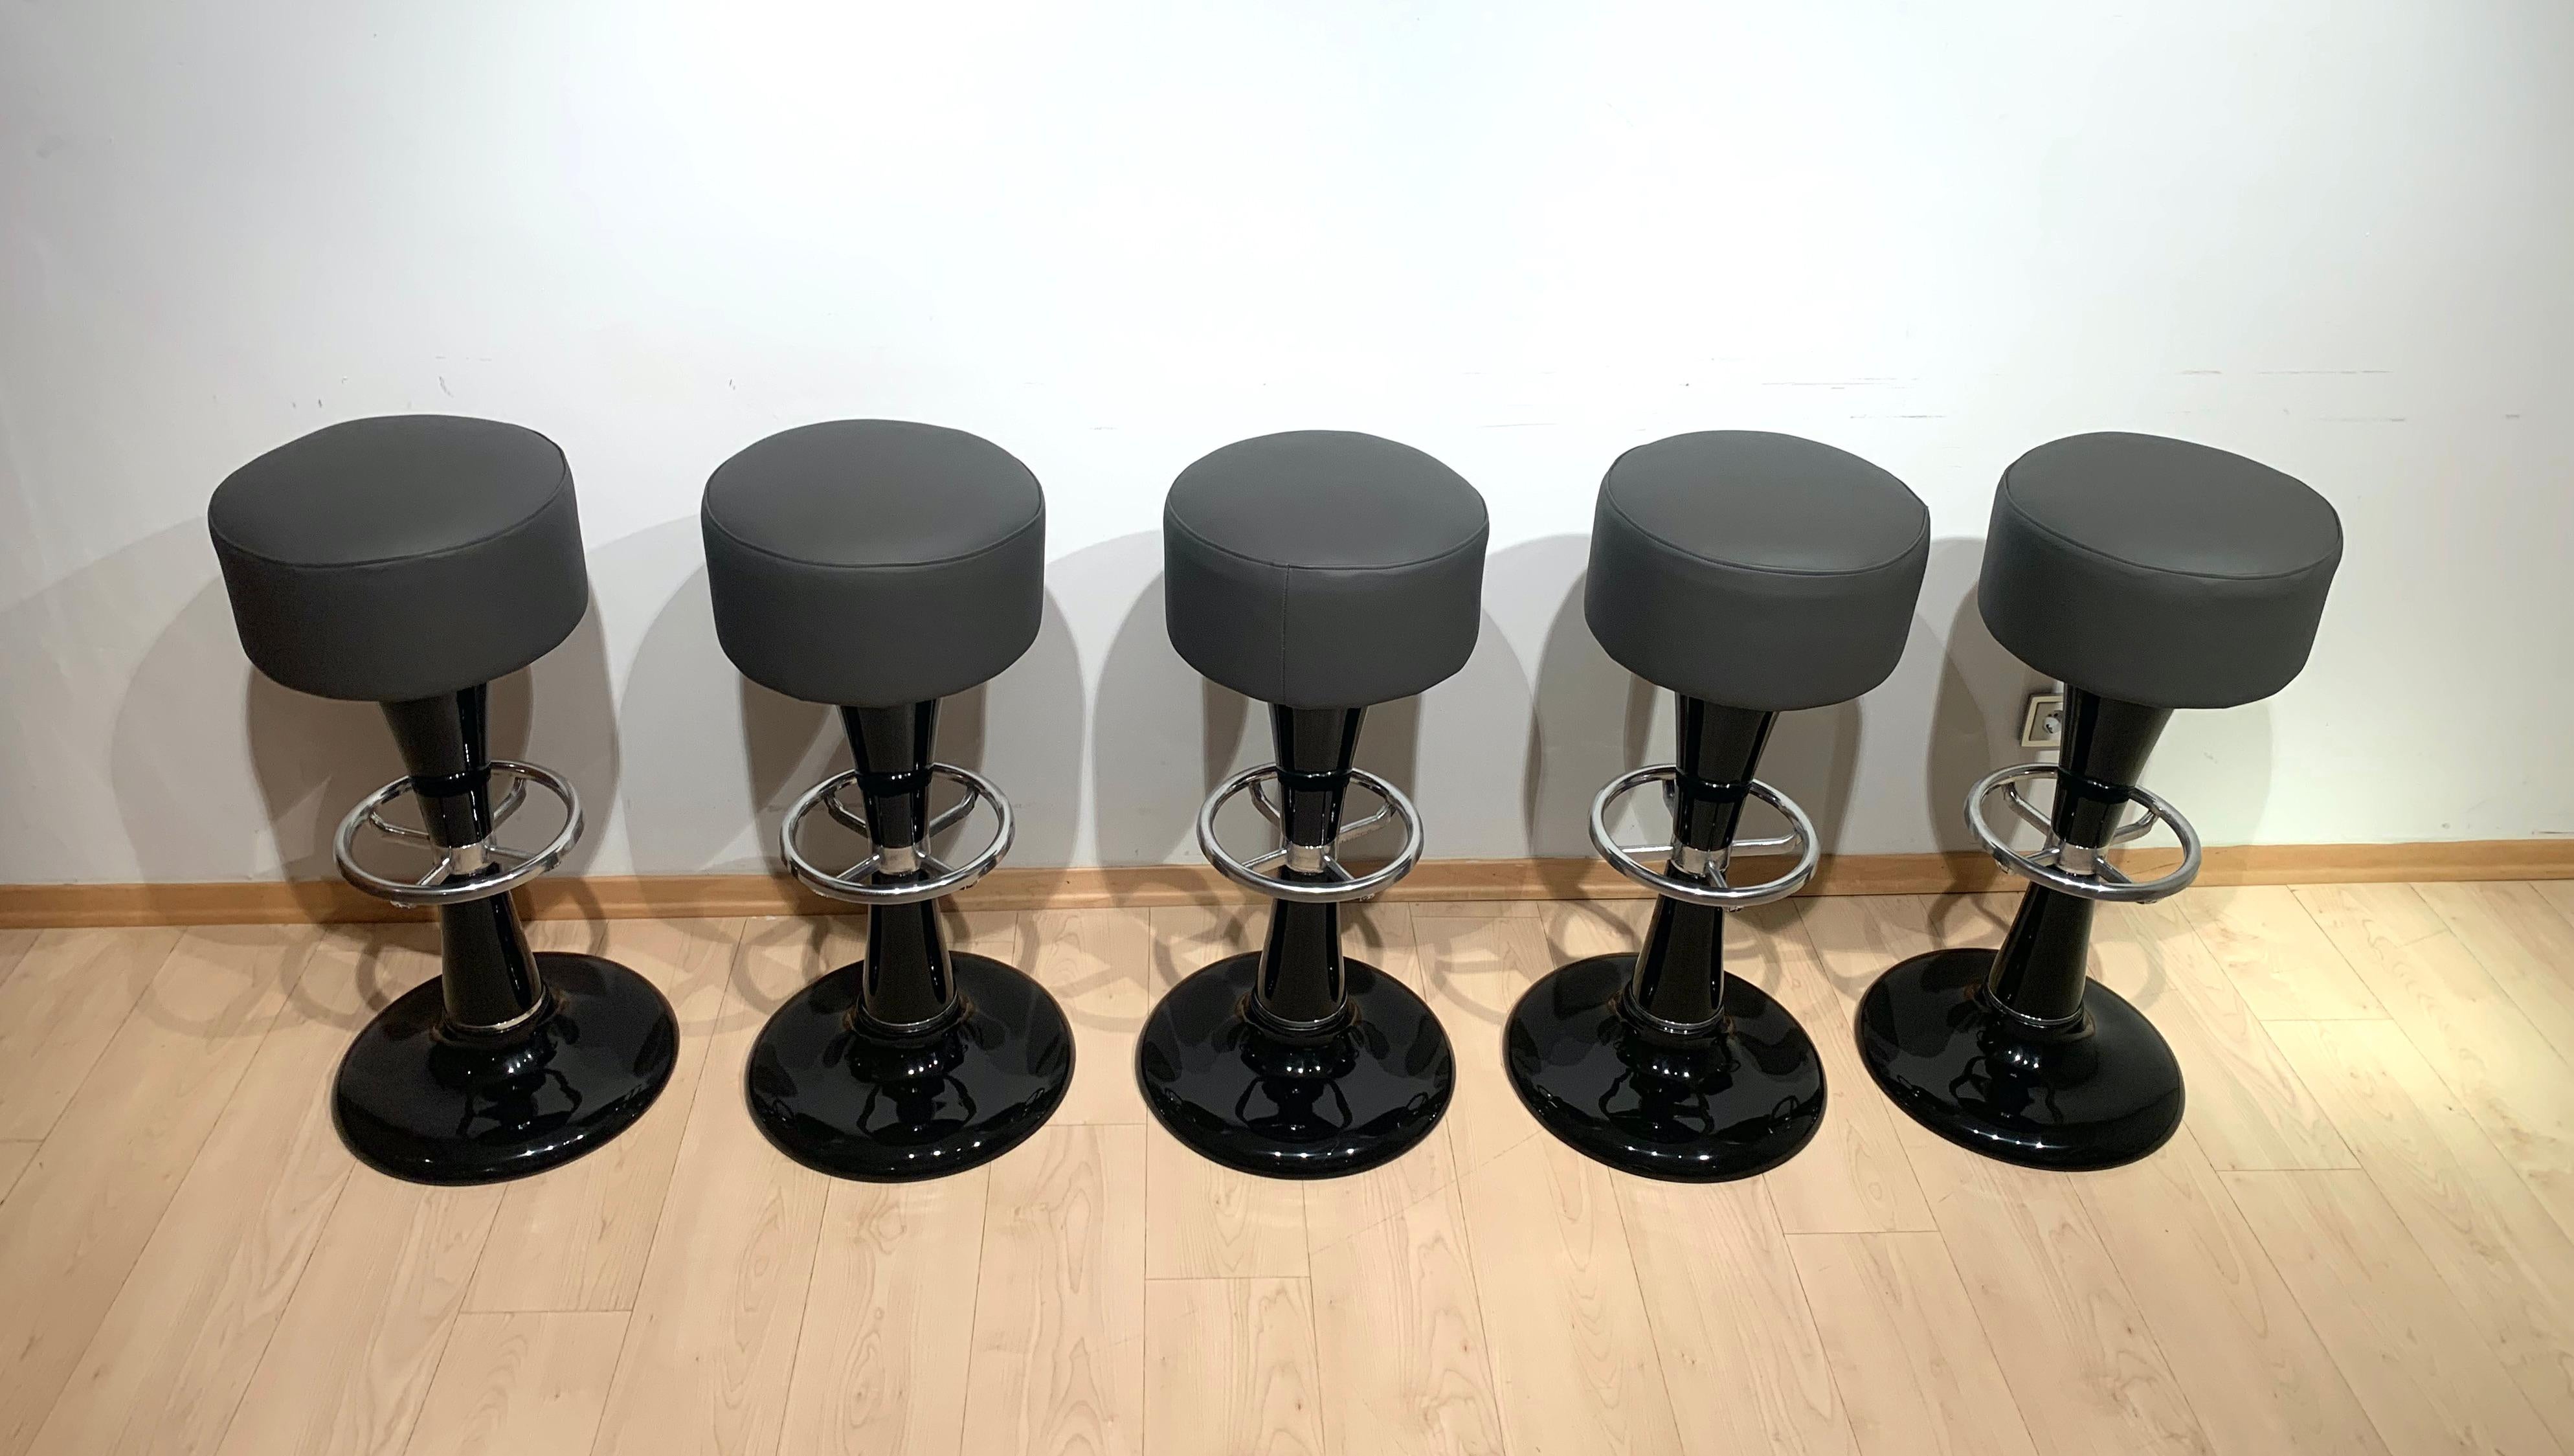 Galvanized Metal Barstools, Black Lacquer, Chrome, Grey Leather, France, 1950s For Sale